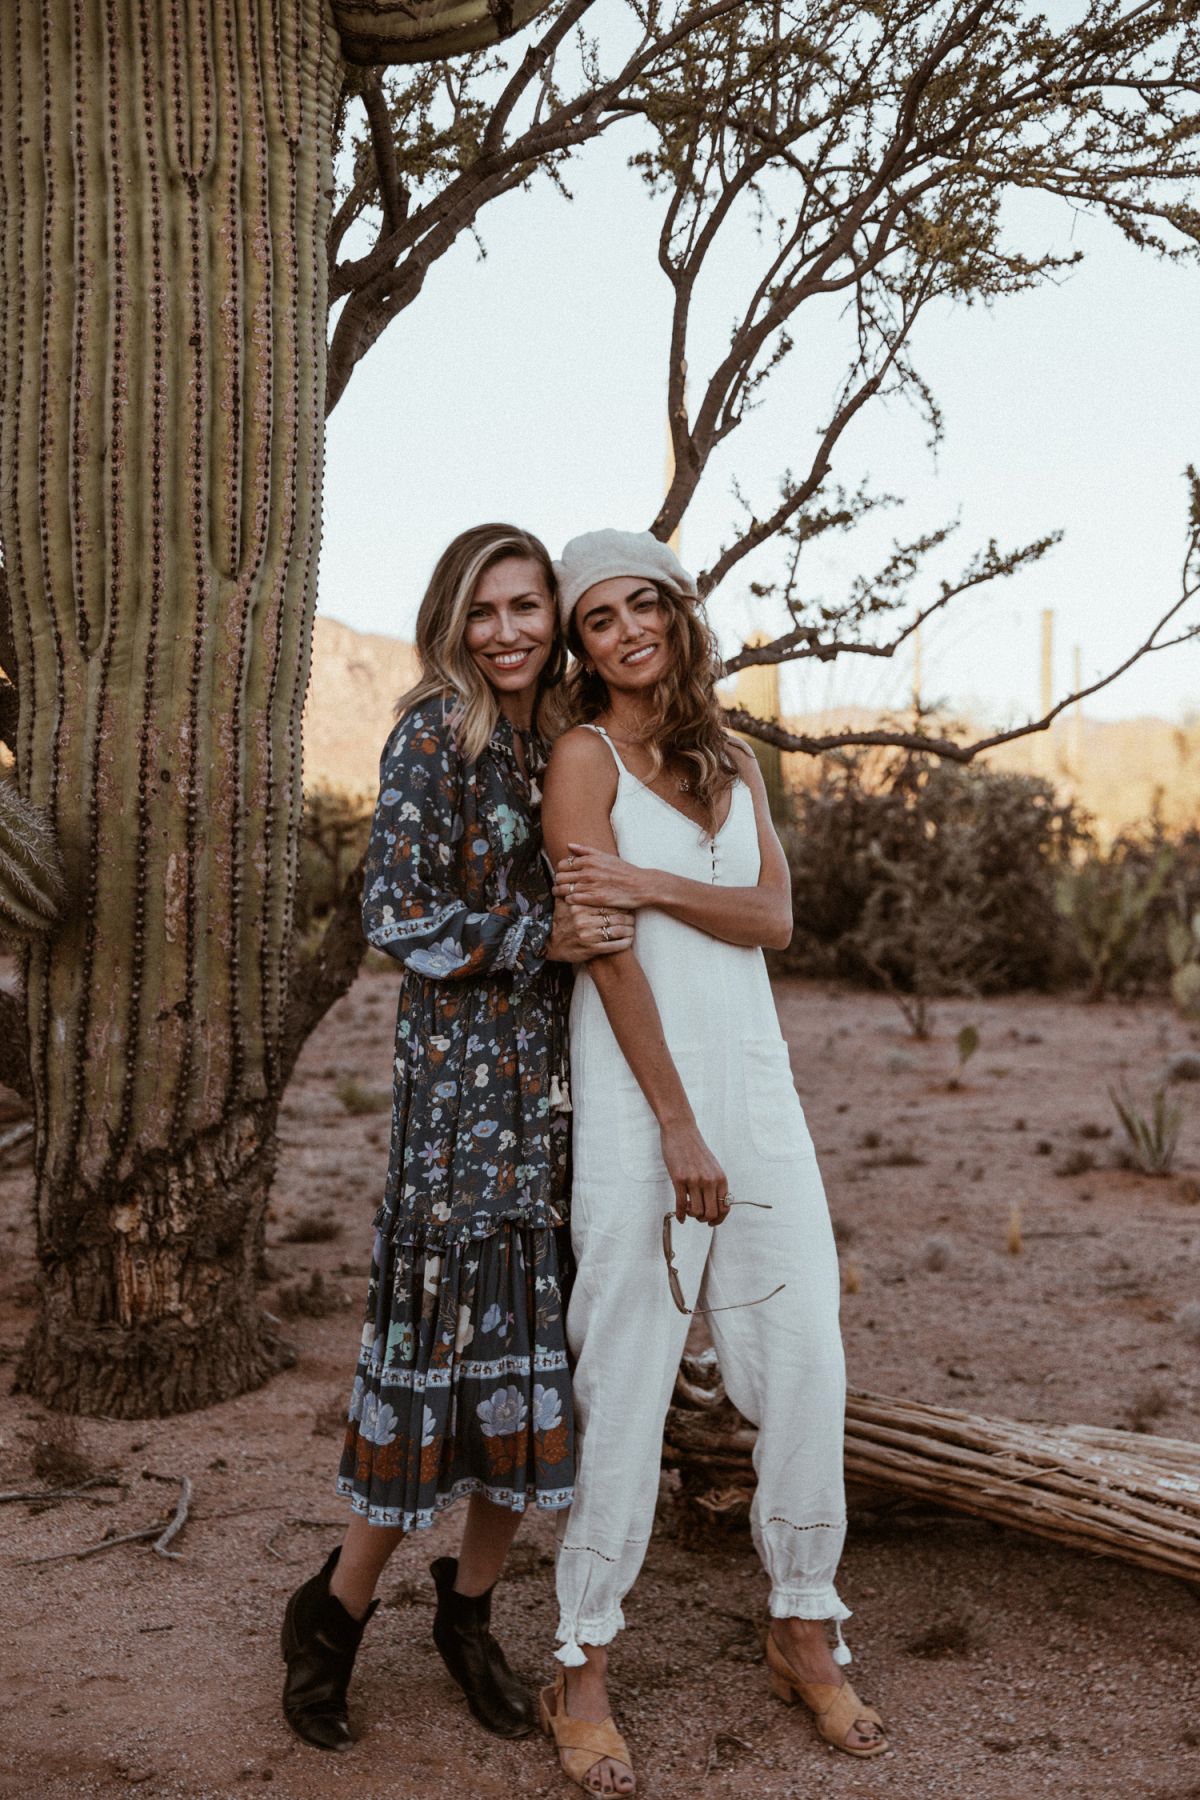 NIKKI REED at Spell & the Gipsy Escape to Arizona Event 05/29/2019 ...